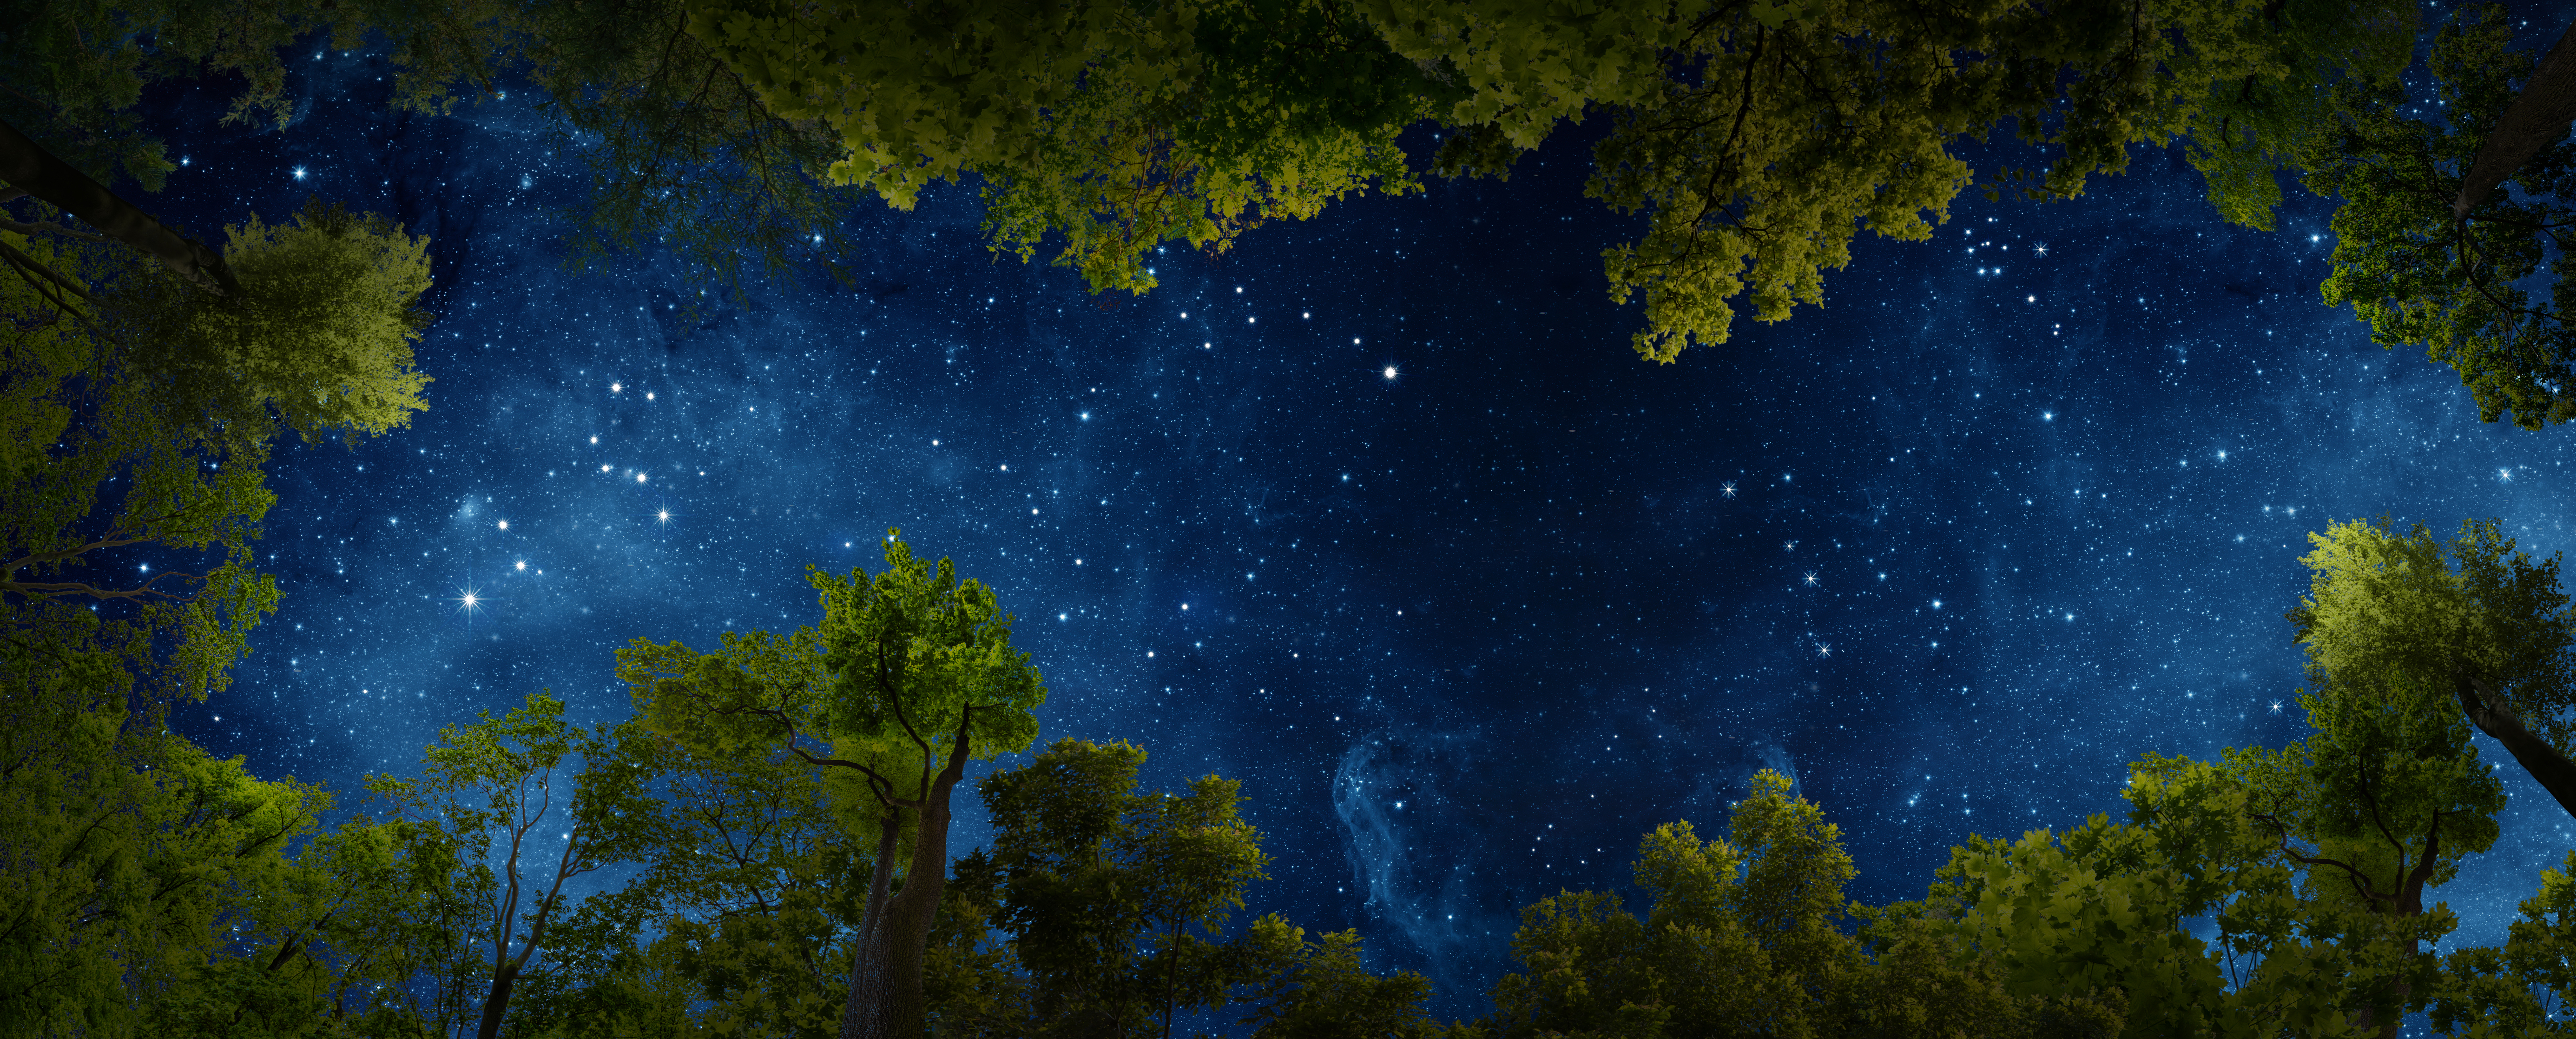 A night sky surrounded by green trees.